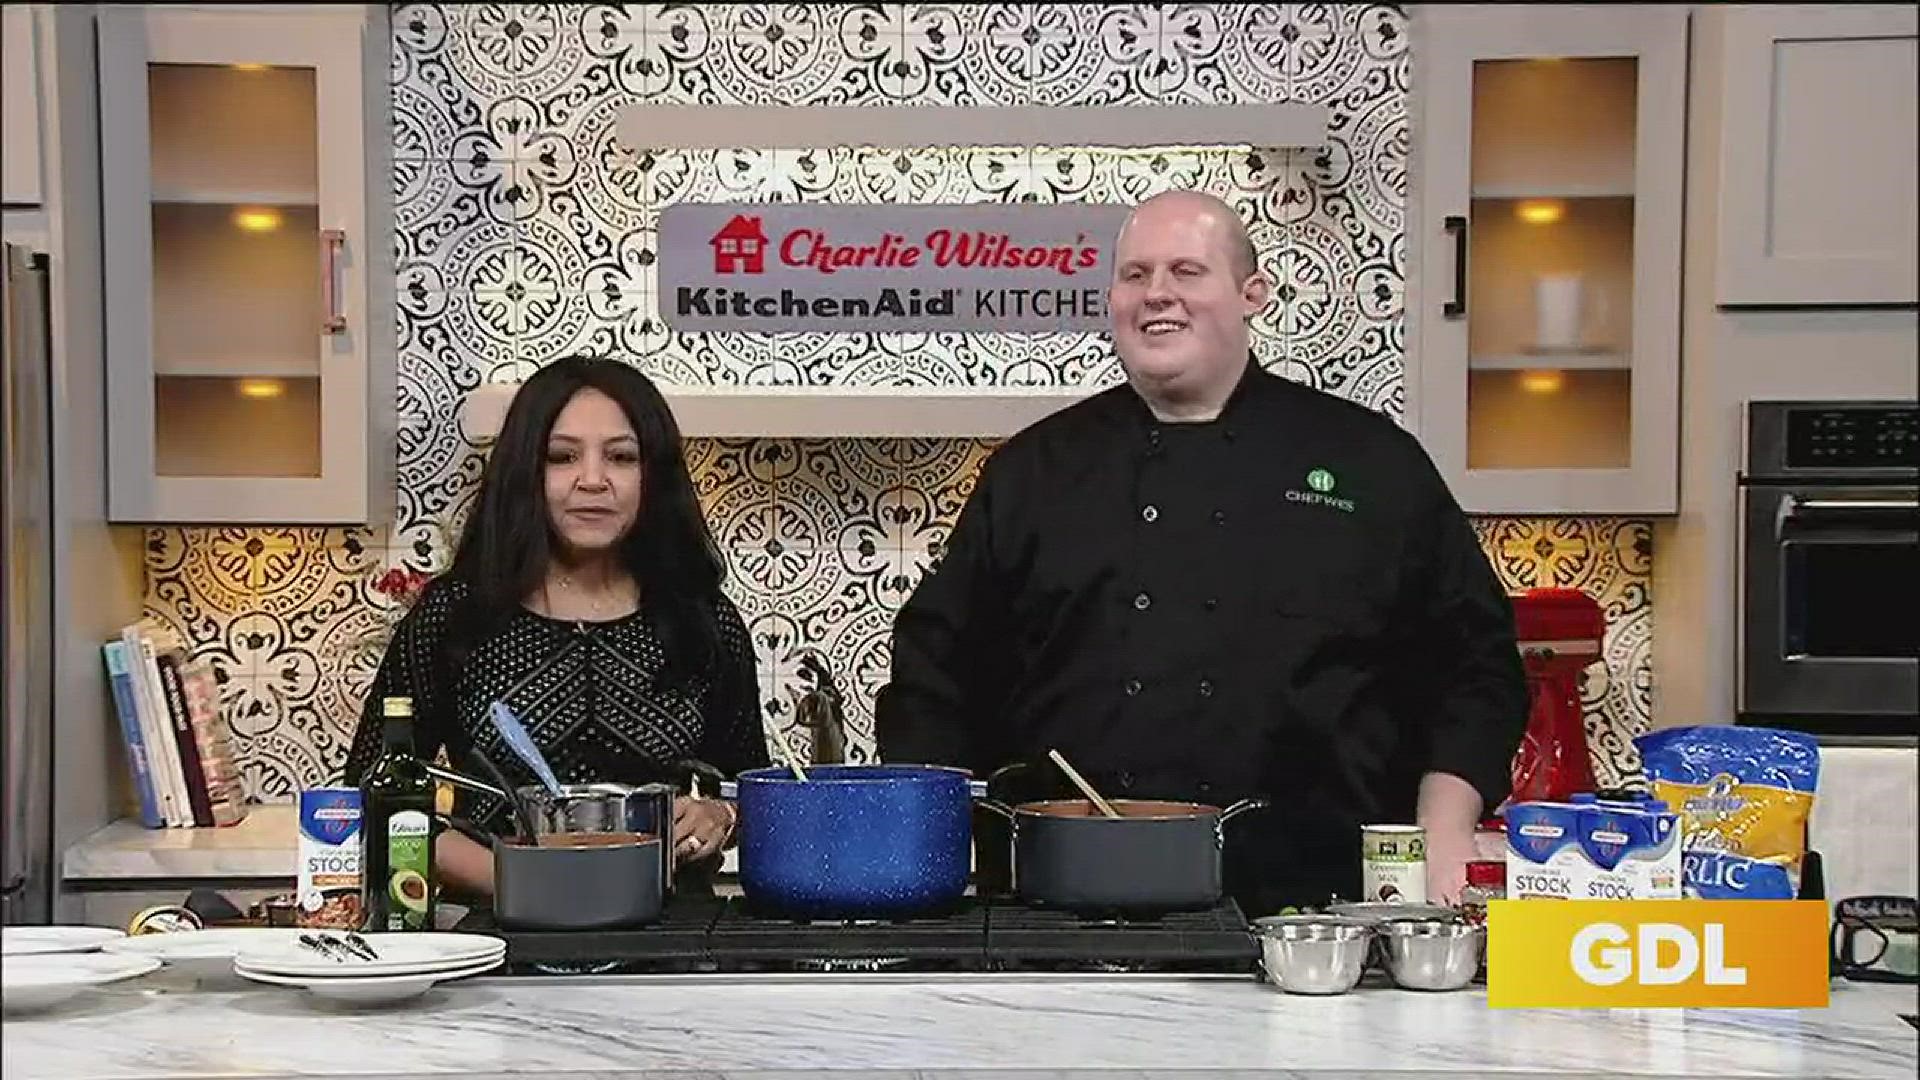 Chef Wes of ChefWes.com stopped by to cook up some delicious soups and dish about the Super Bowl with Angie Fenton, Joann Dickson, Jeff Howard and JD Dotson.